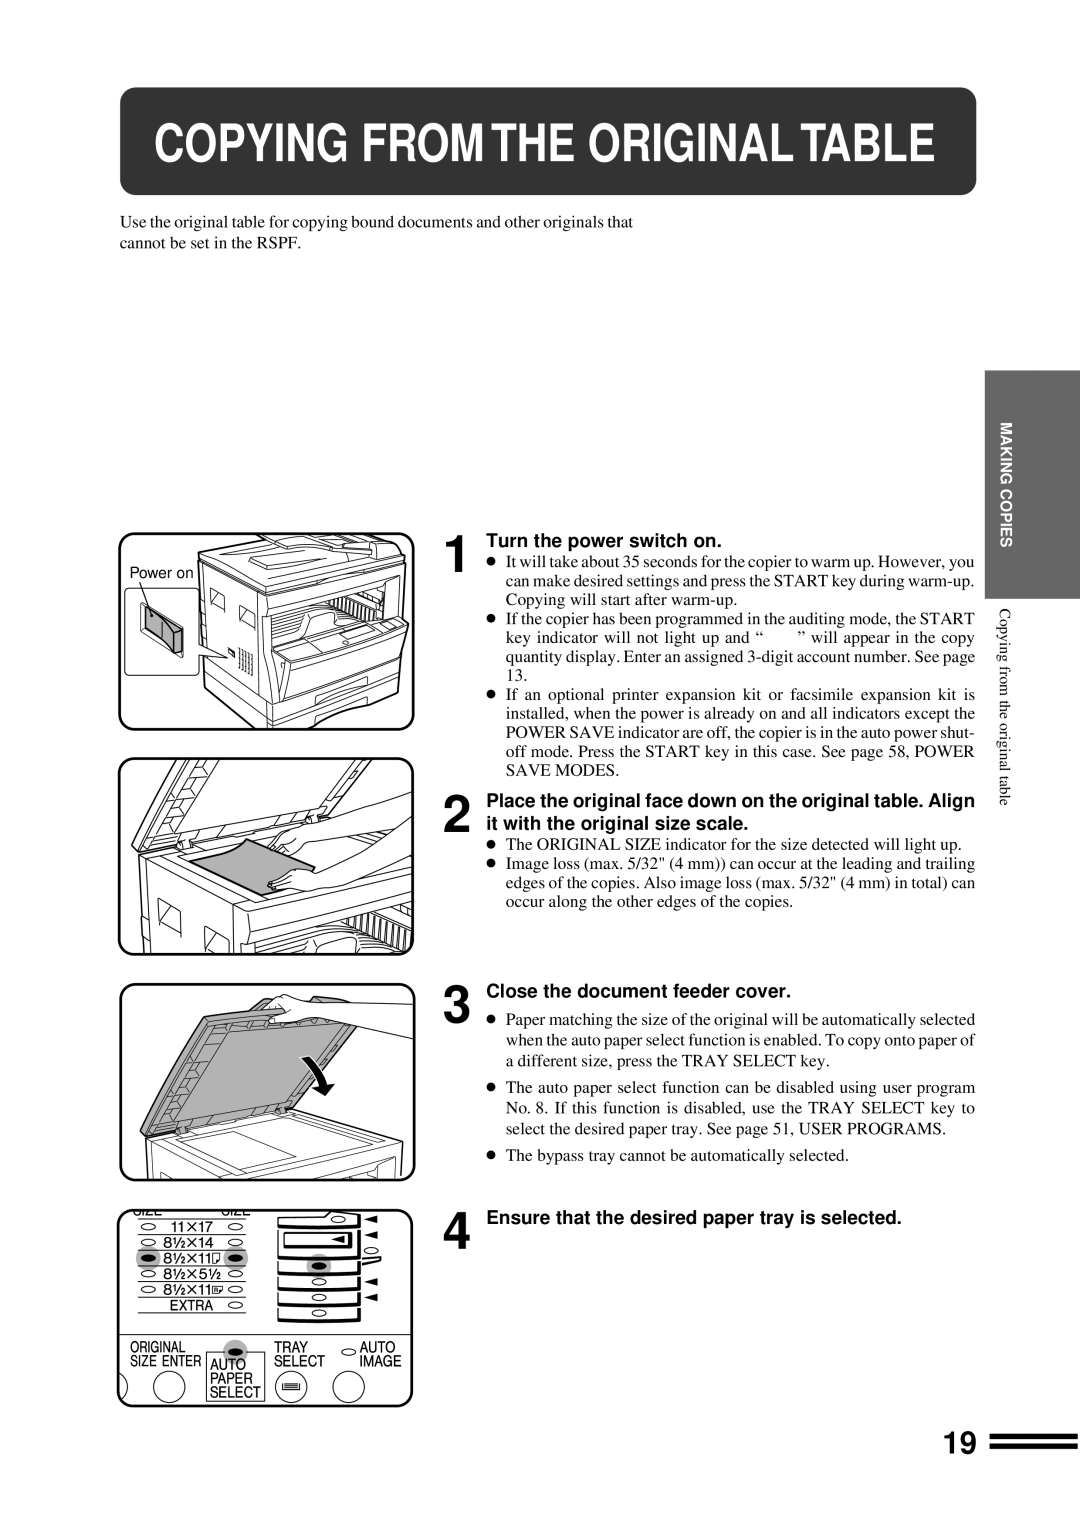 Sharp AR-207 operation manual Copying From The Original Table, Close the document feeder cover, Turn the power switch on 